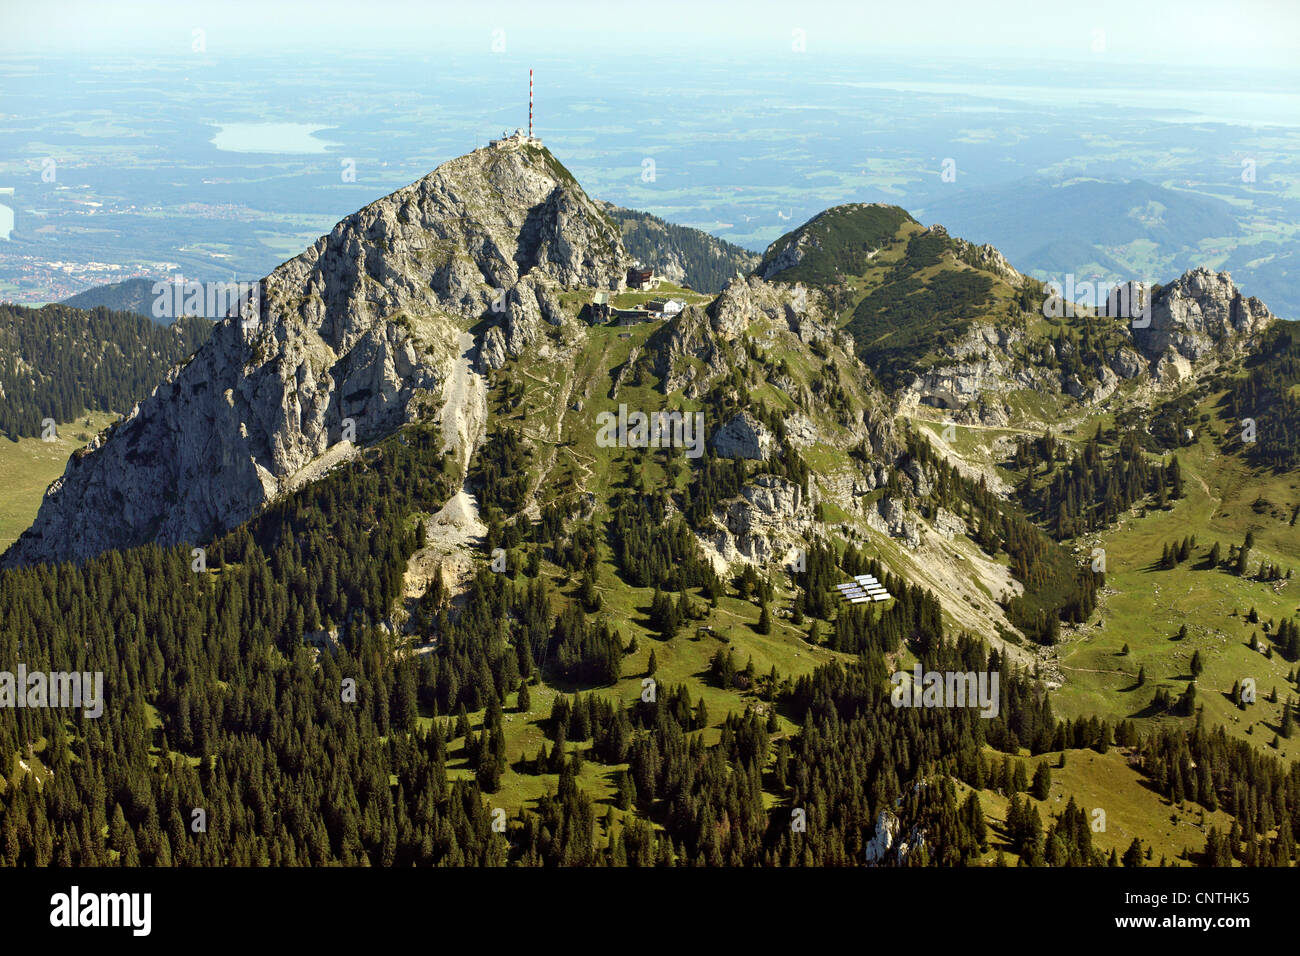 Wendelstein, view from South, summit with mountain station radio tower, Germany, Bavaria Stock Photo